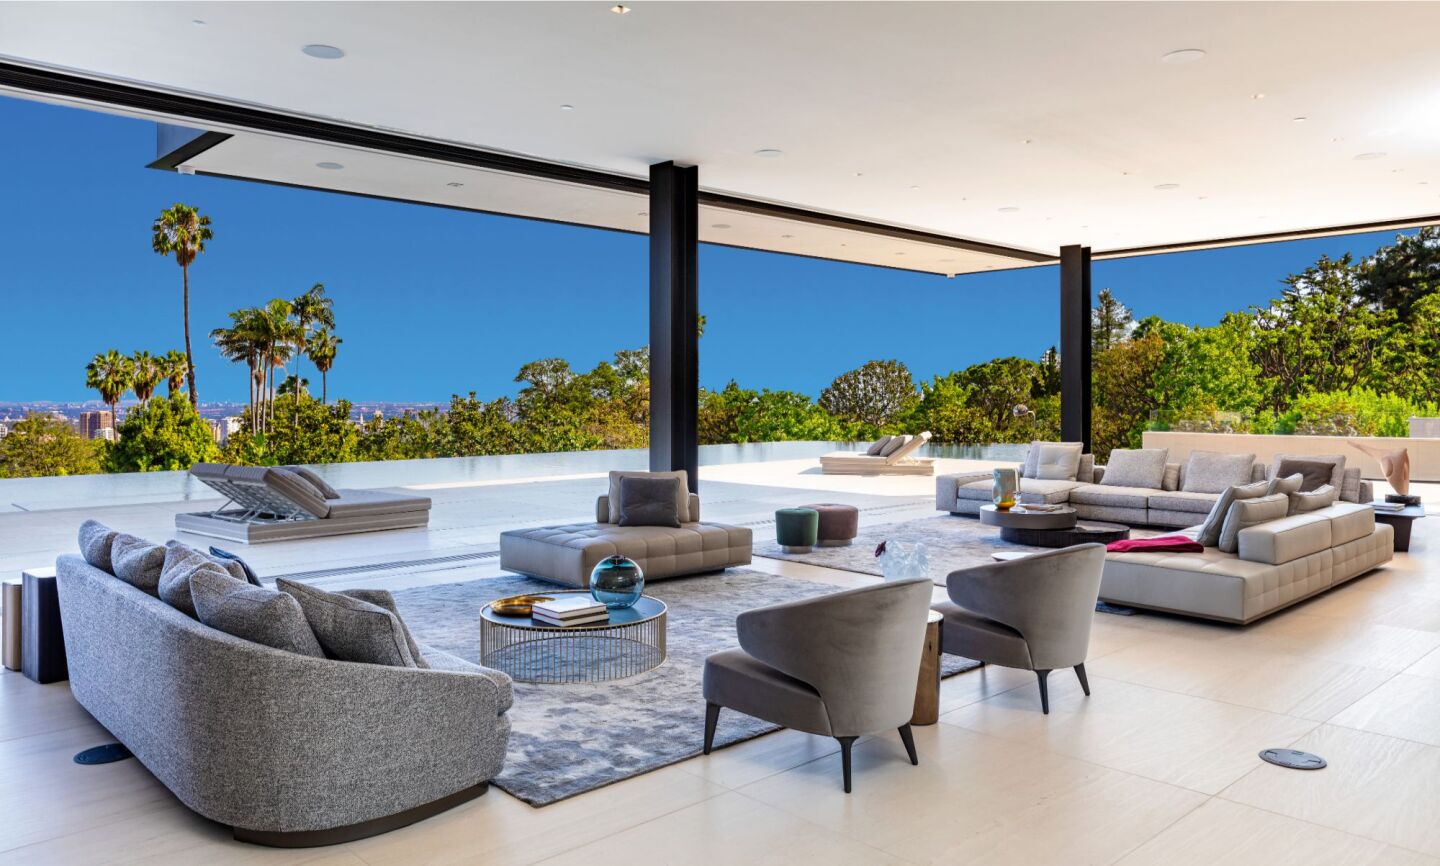 The indoor-outdoor covered, furnished living room overlooks trees and sky.